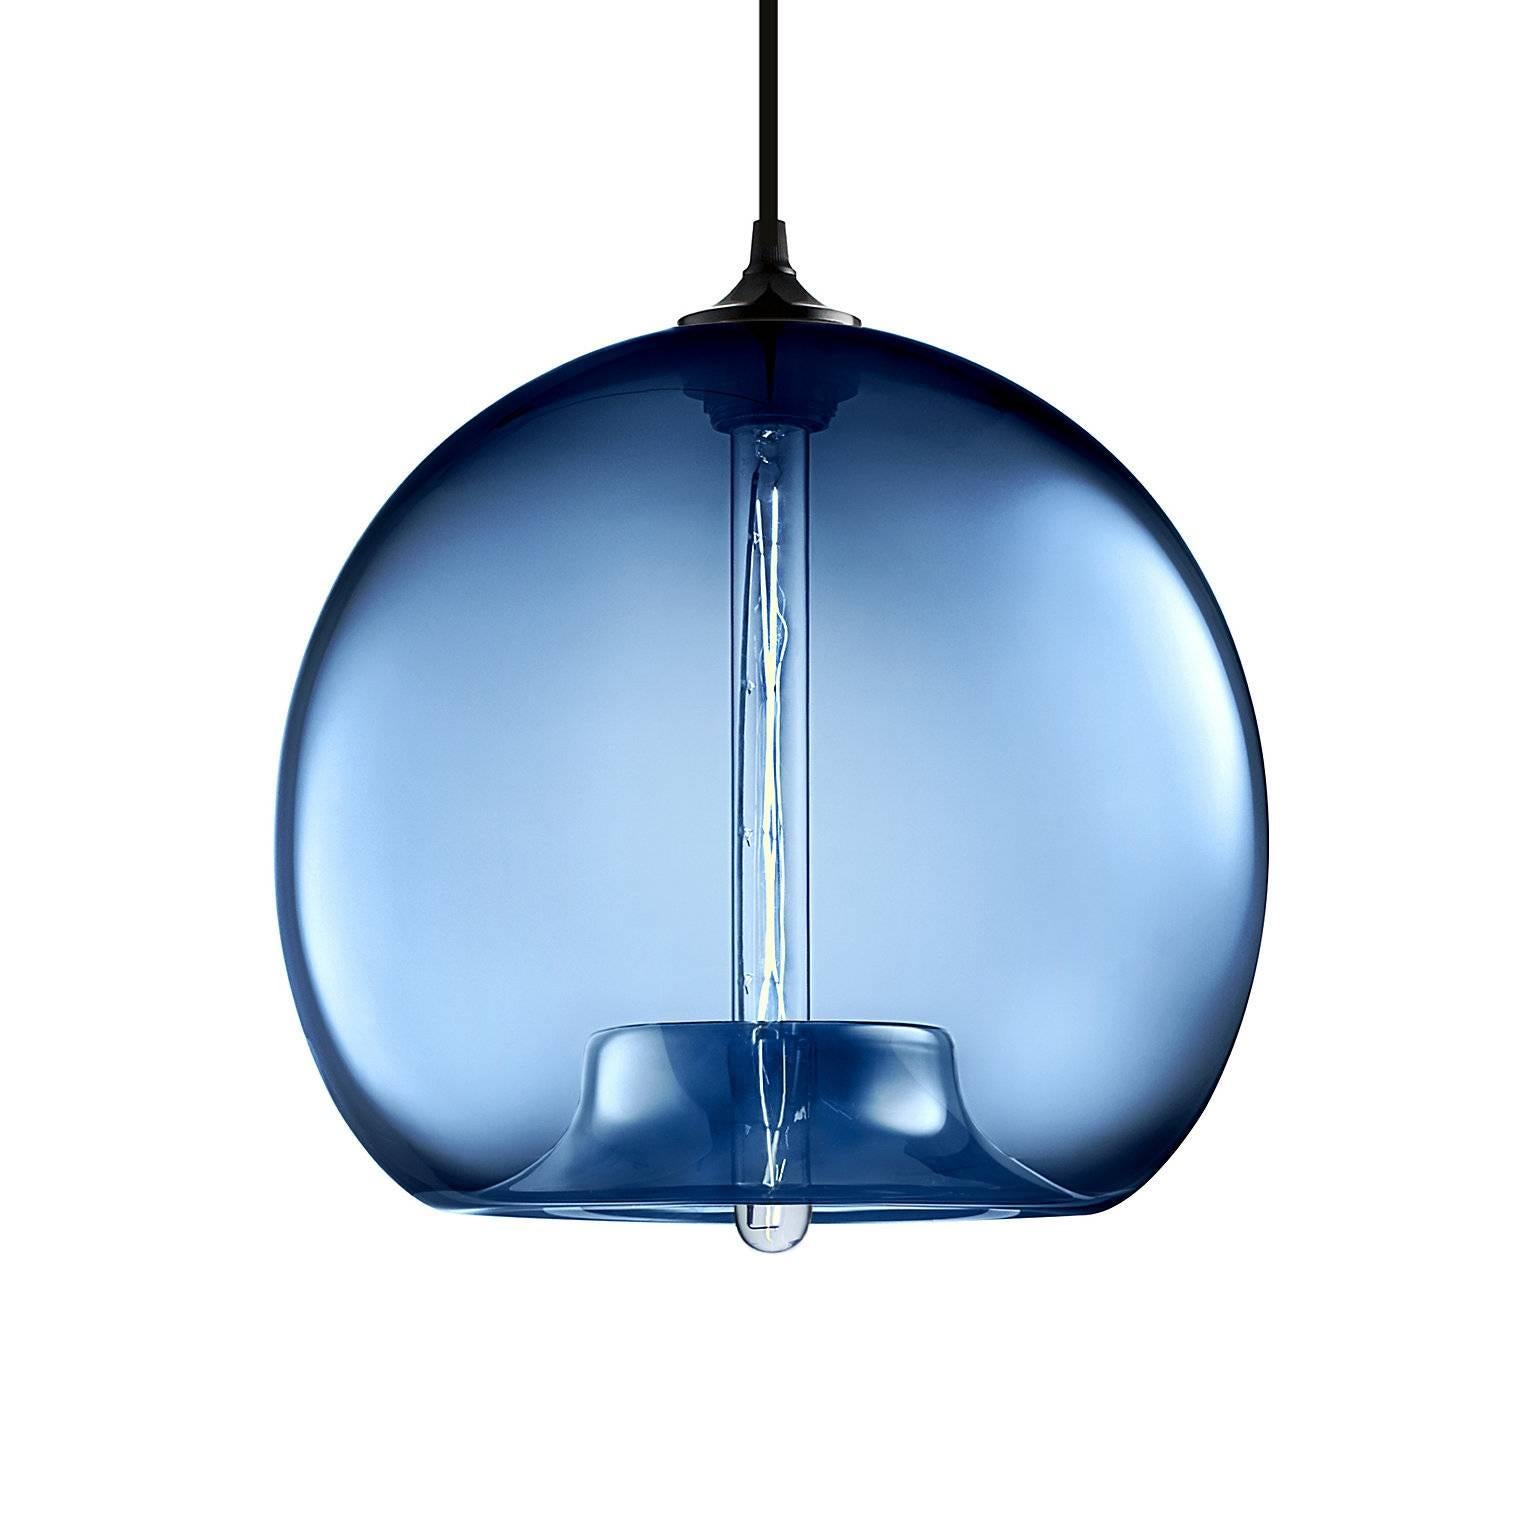 Stamen Plum Handblown Modern Glass Pendant Light, Made in the USA In New Condition For Sale In Beacon, NY